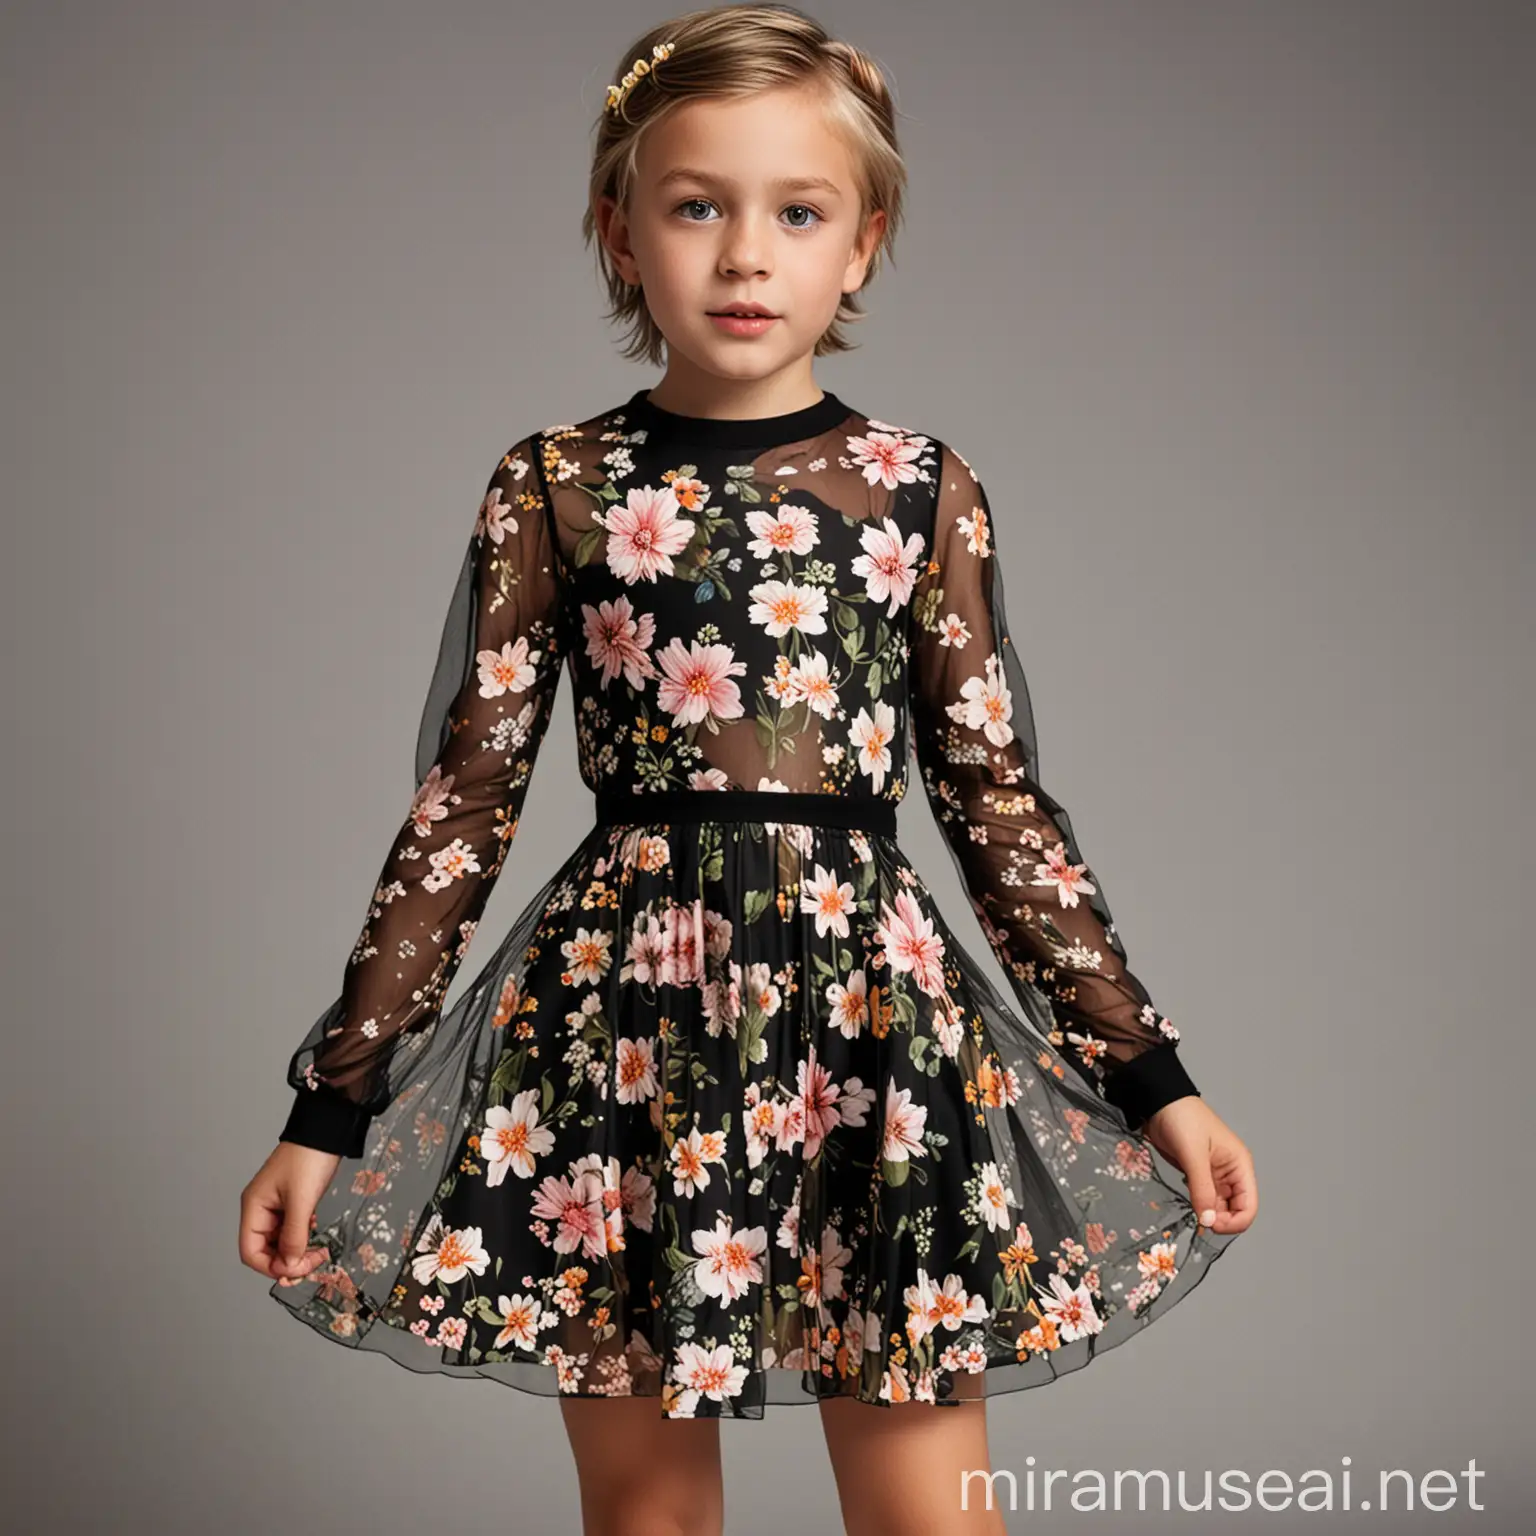 Young boy in cute flower dress where the top is black with long sleeves and the bottom skirt part is a short floral skater skirt and partly see through